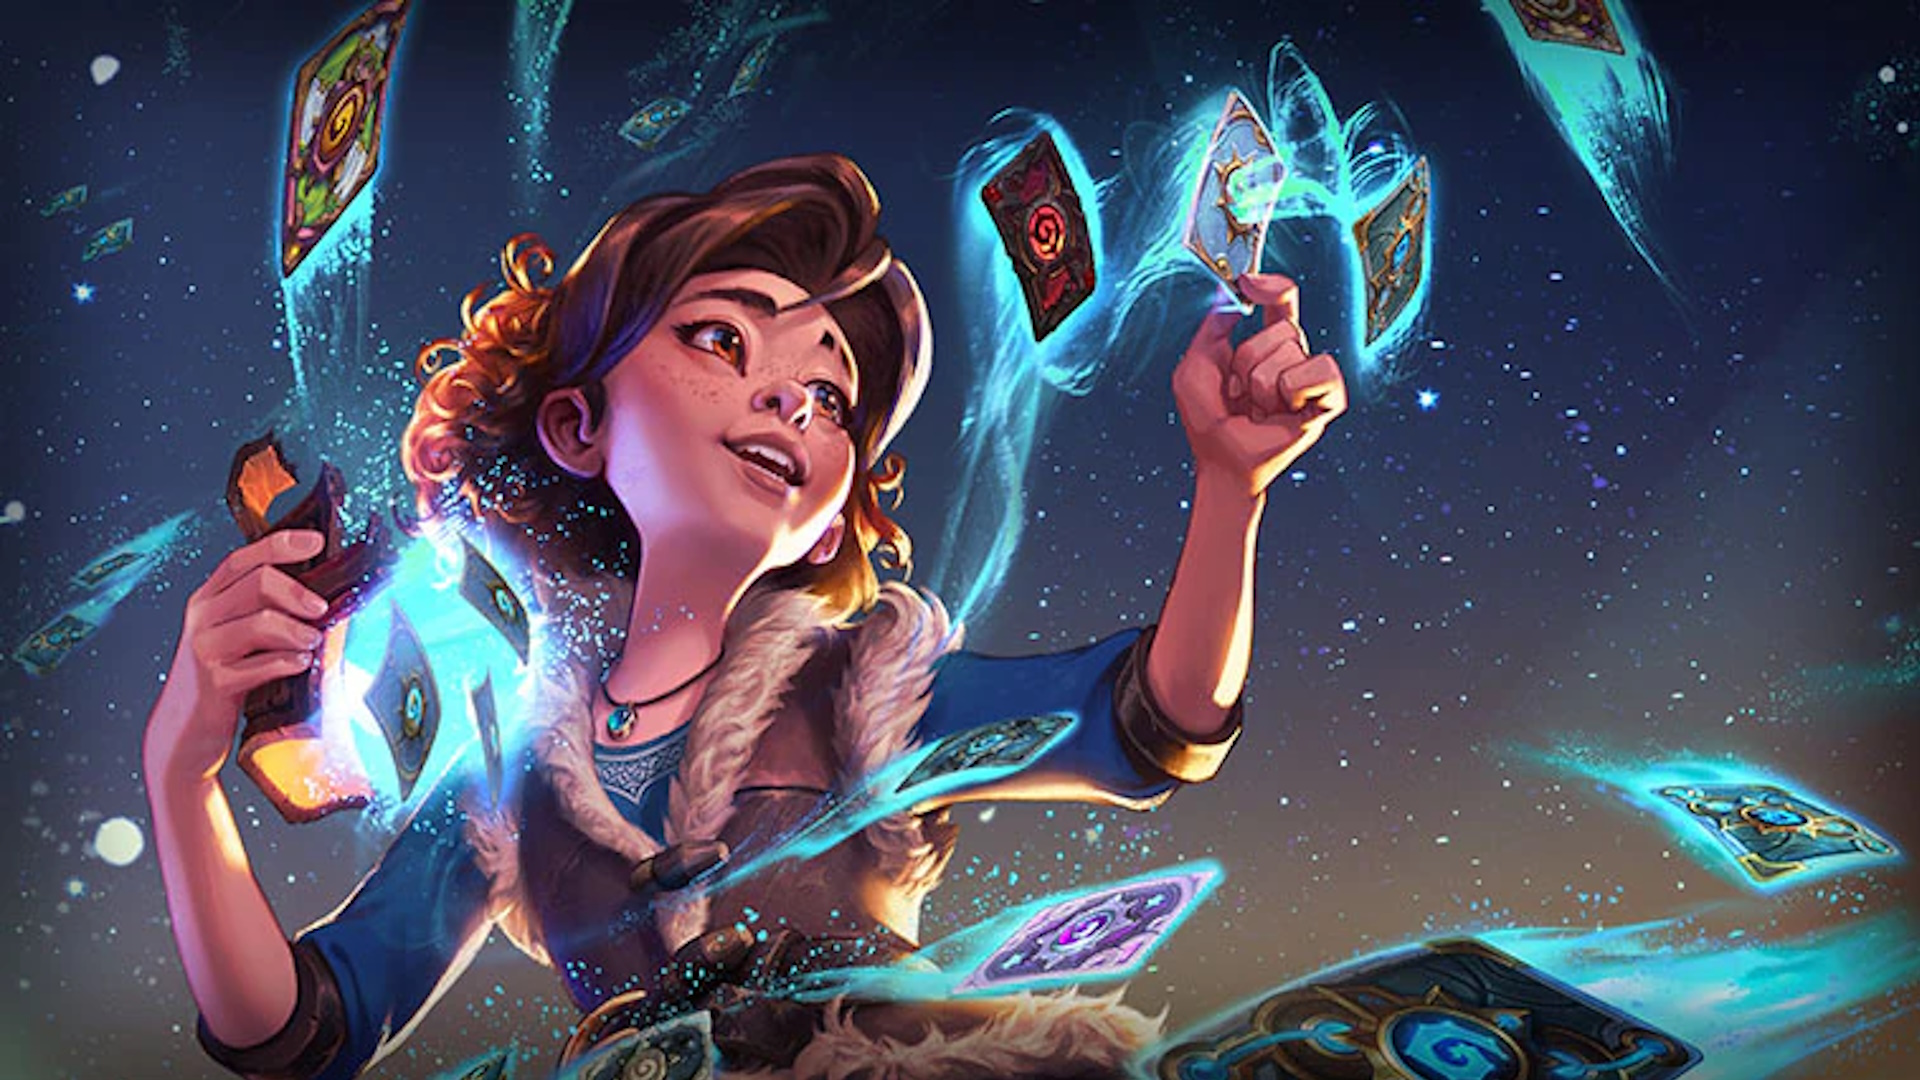 Get 9 free Hearthstone packs with Community Day Twitch Drops | esports.gg